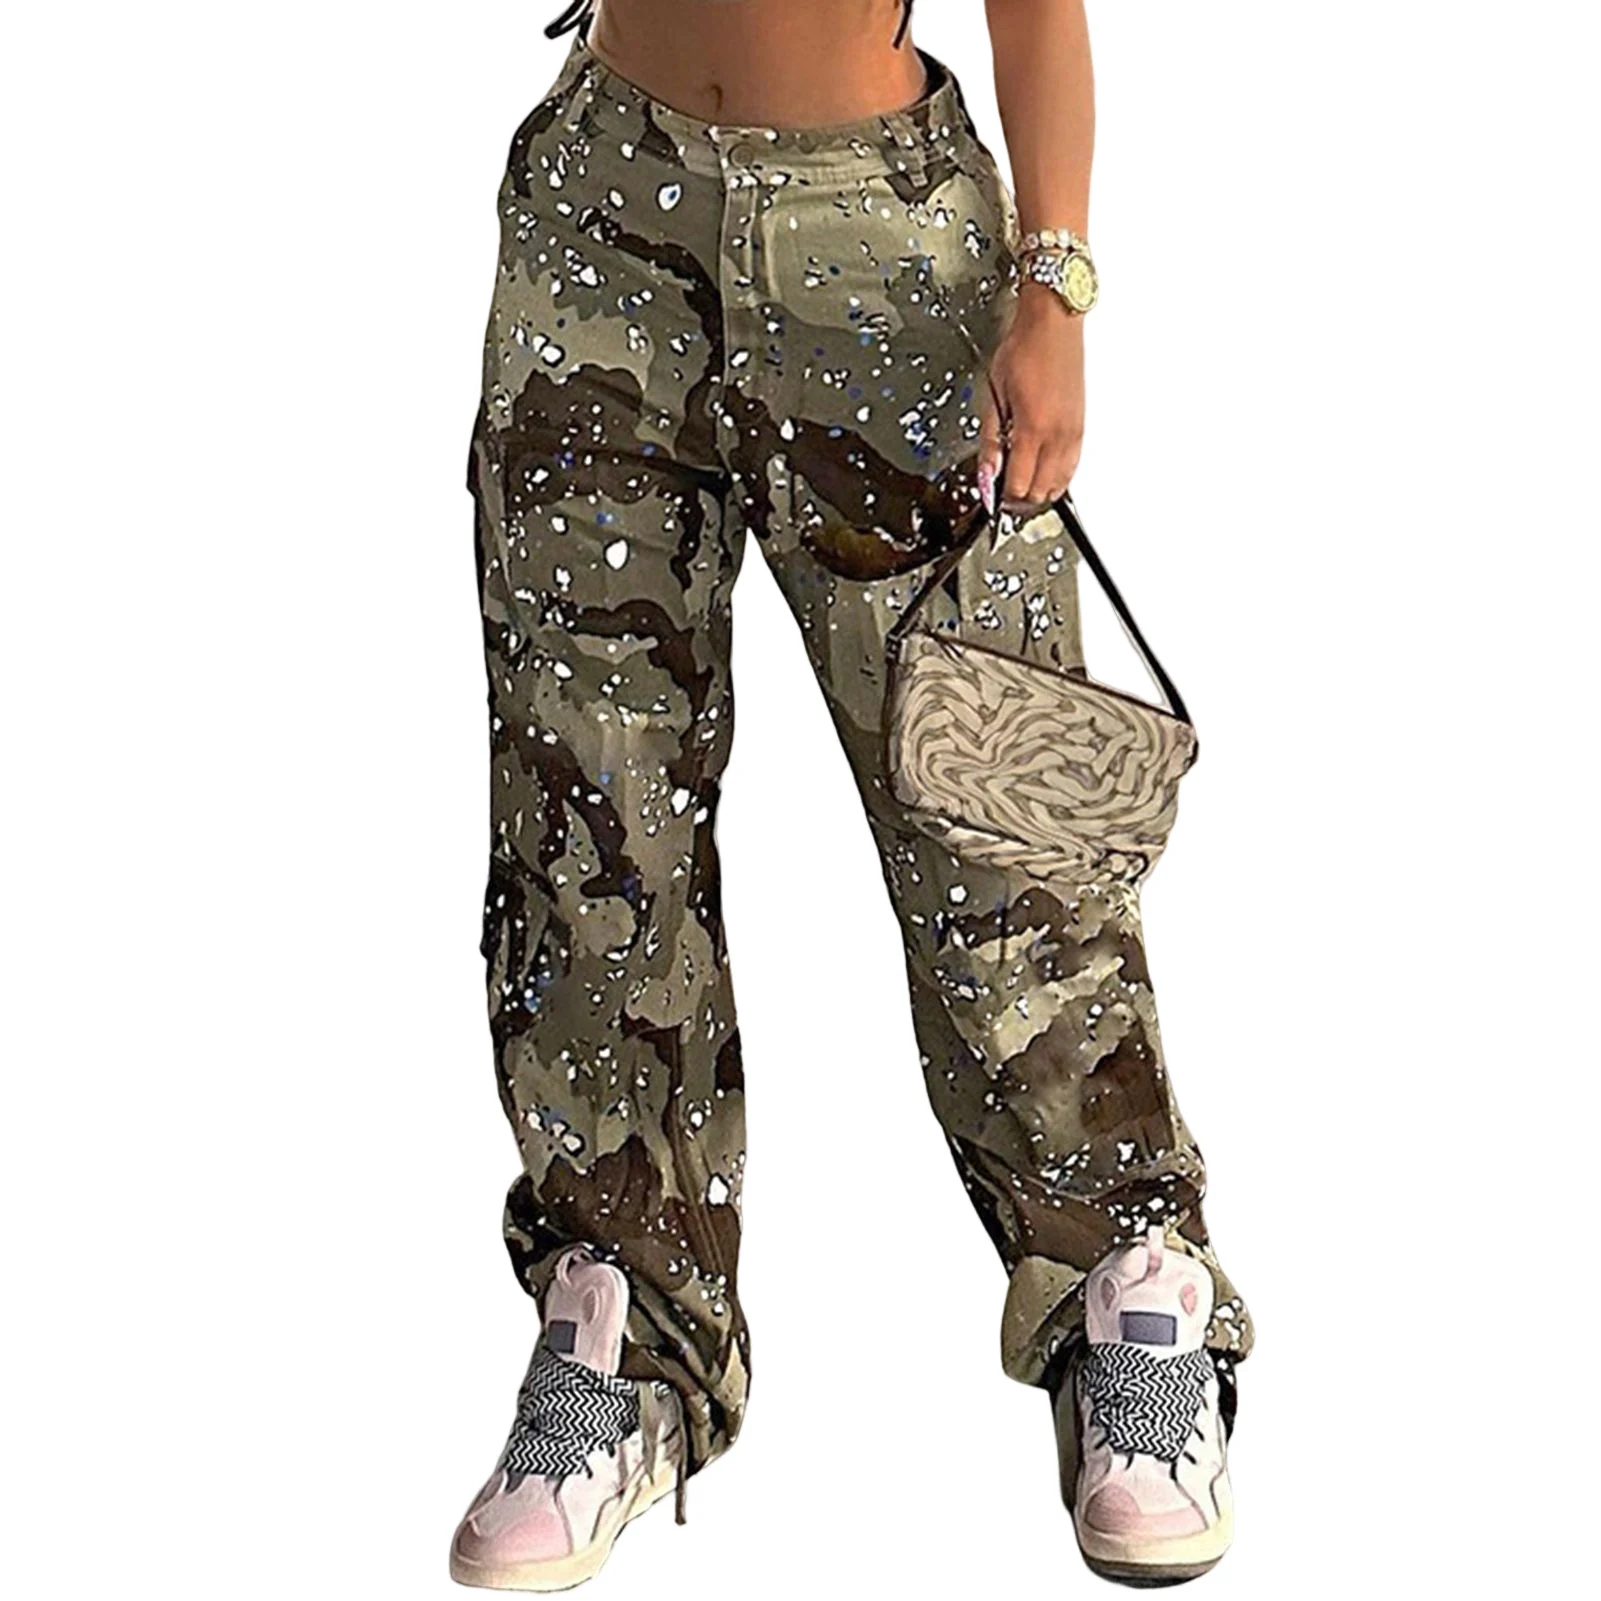 

Polka-Dot Printed Sports Camo Trousers Contrast Color Wide Leg Pants Casual Fashion European Style Drawstring for Outdoor Travel